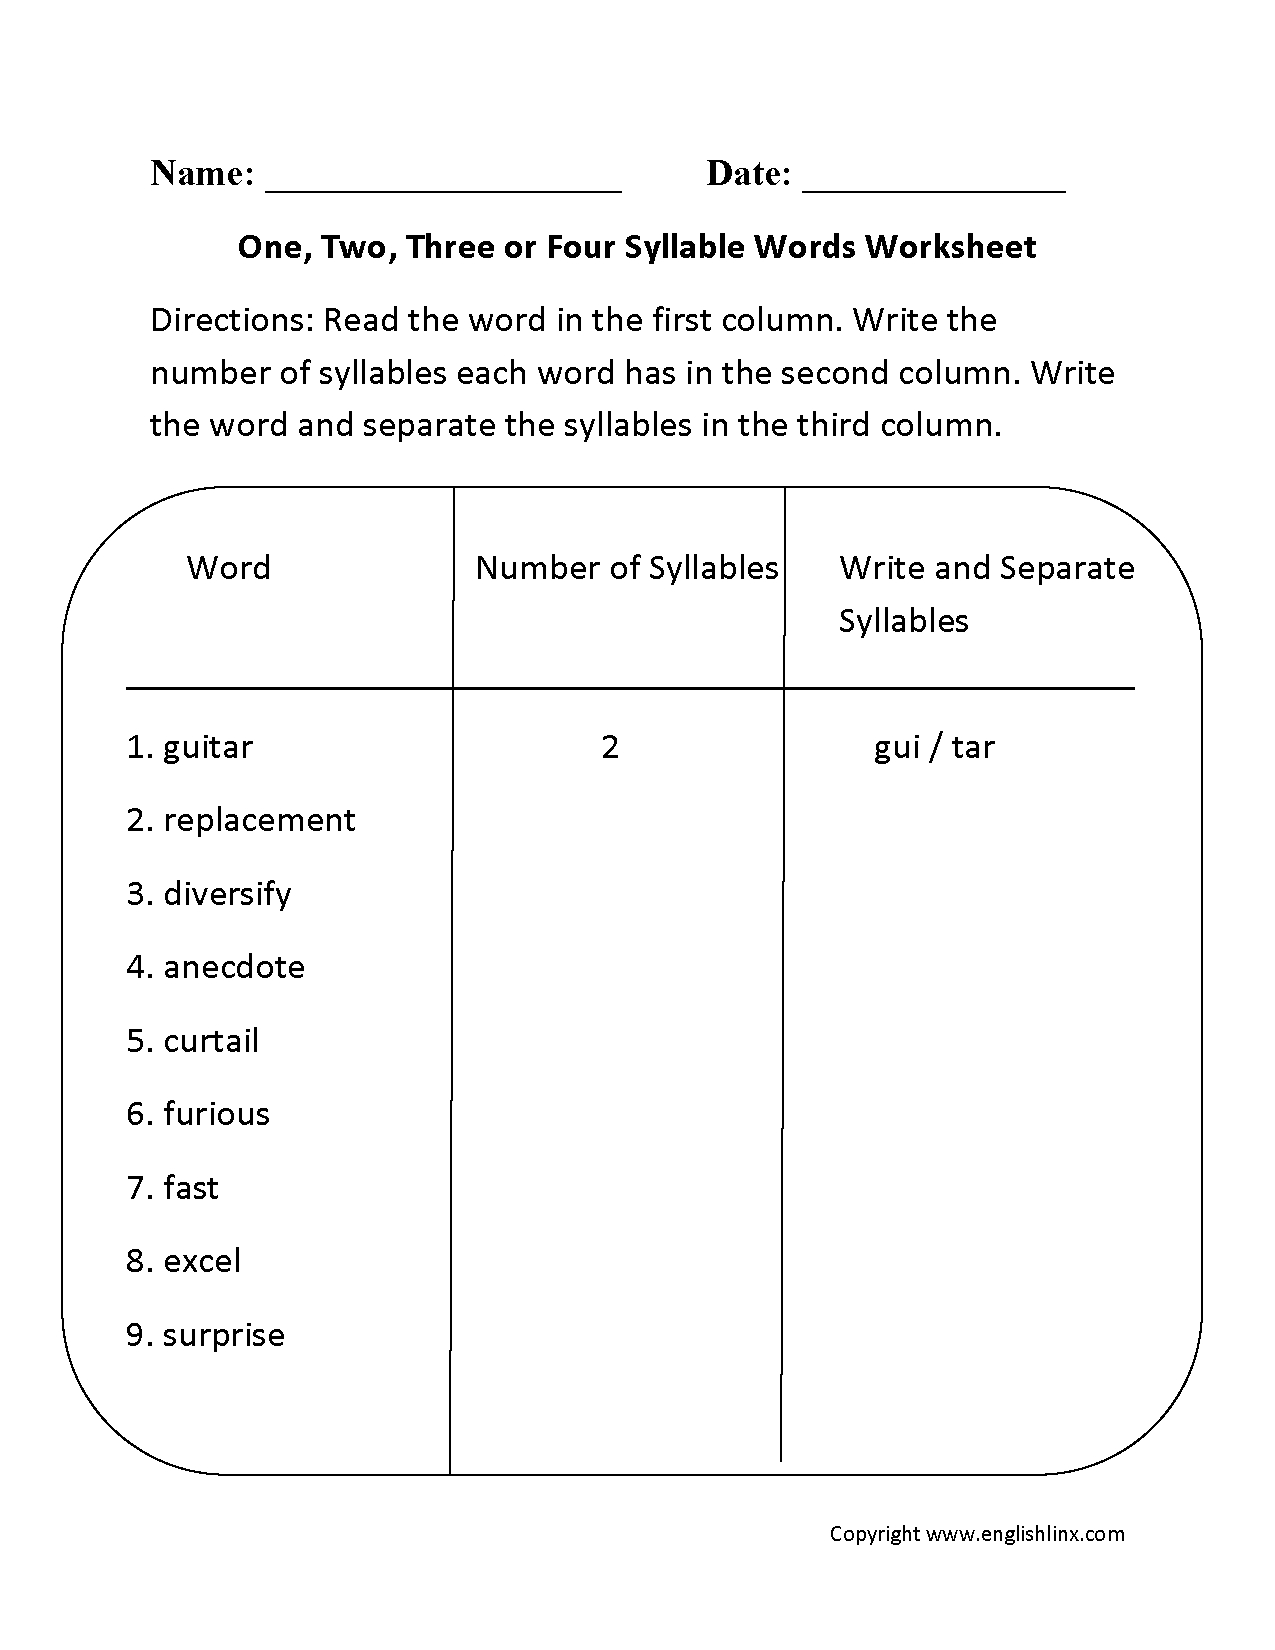 One, Two, Three Or Four Syllable Words Worksheet | Syllables - Free Printable Open And Closed Syllable Worksheets